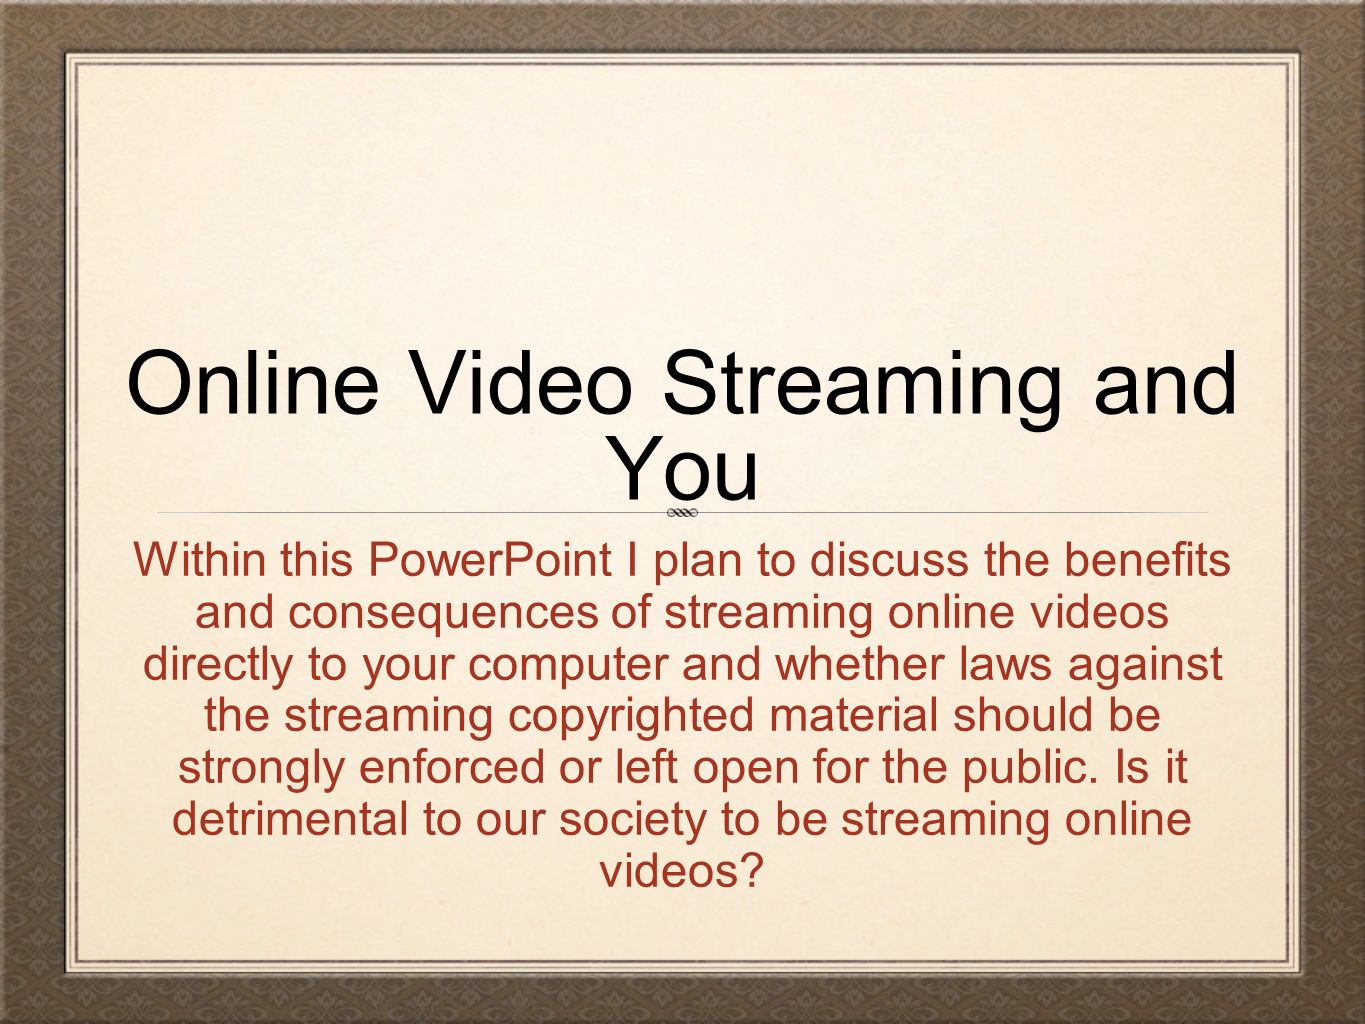 Online Video Streaming and You Within this PowerPoint I plan to discuss the benefits and consequences of streaming online videos directly to your computer and whether laws against the streaming copyrighted material should be strongly enforced or left open for the public.